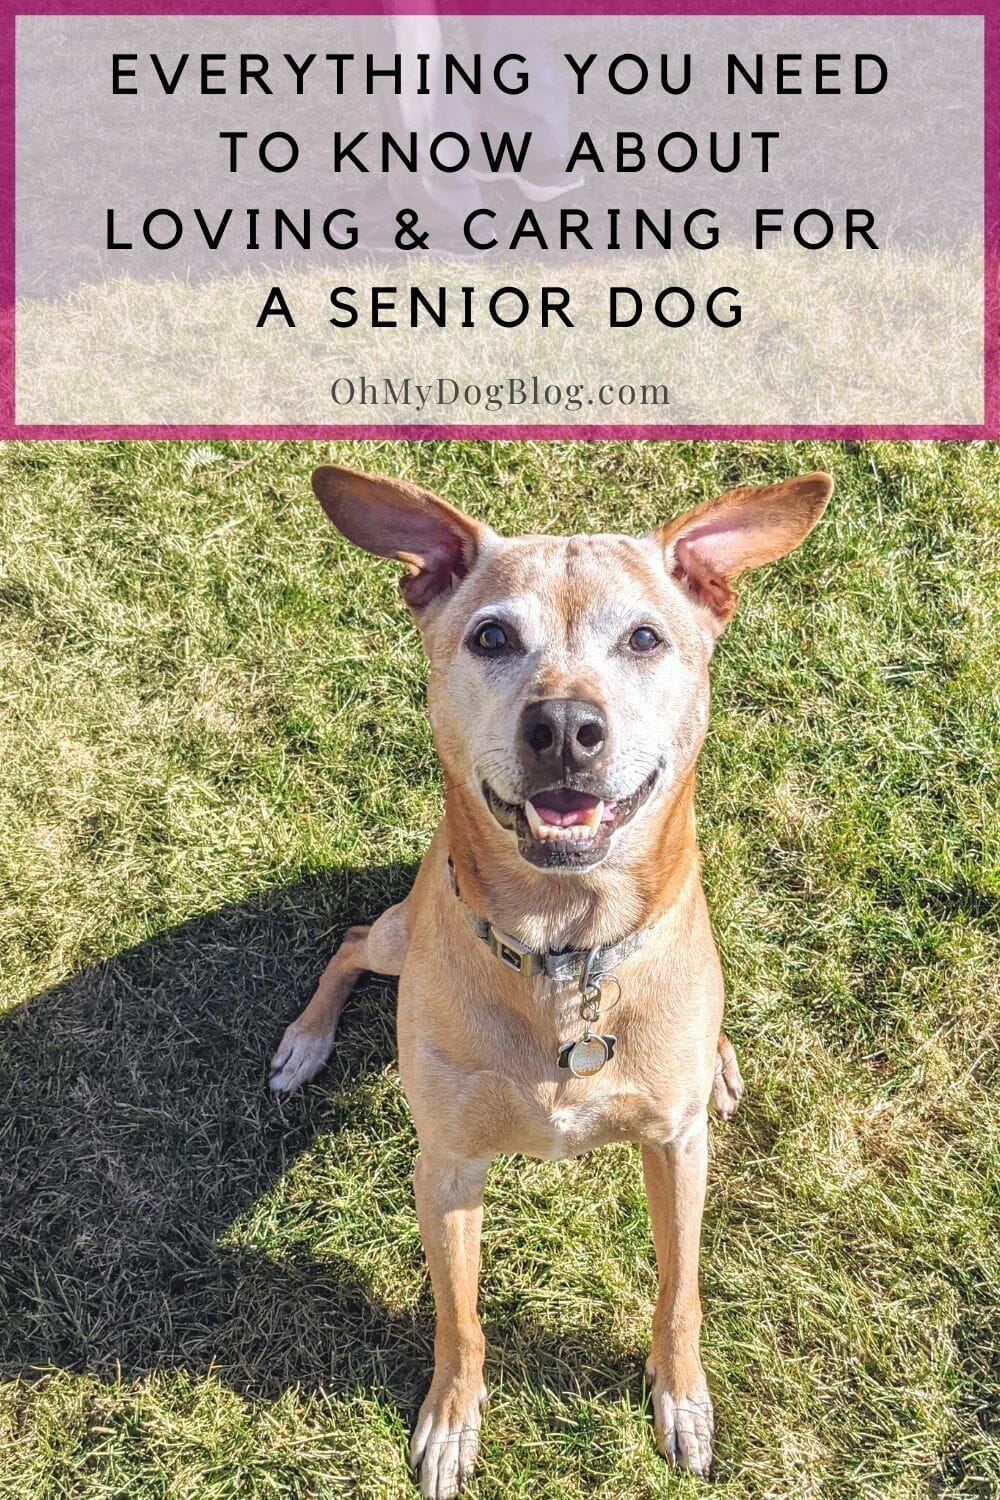 A tan American Staffordshire Terrier mix sits in the grass with the sun shining. His face and feet are gray with age. The text overlay reads: Everything you need to know to know about loving & caring for a senior dog. 